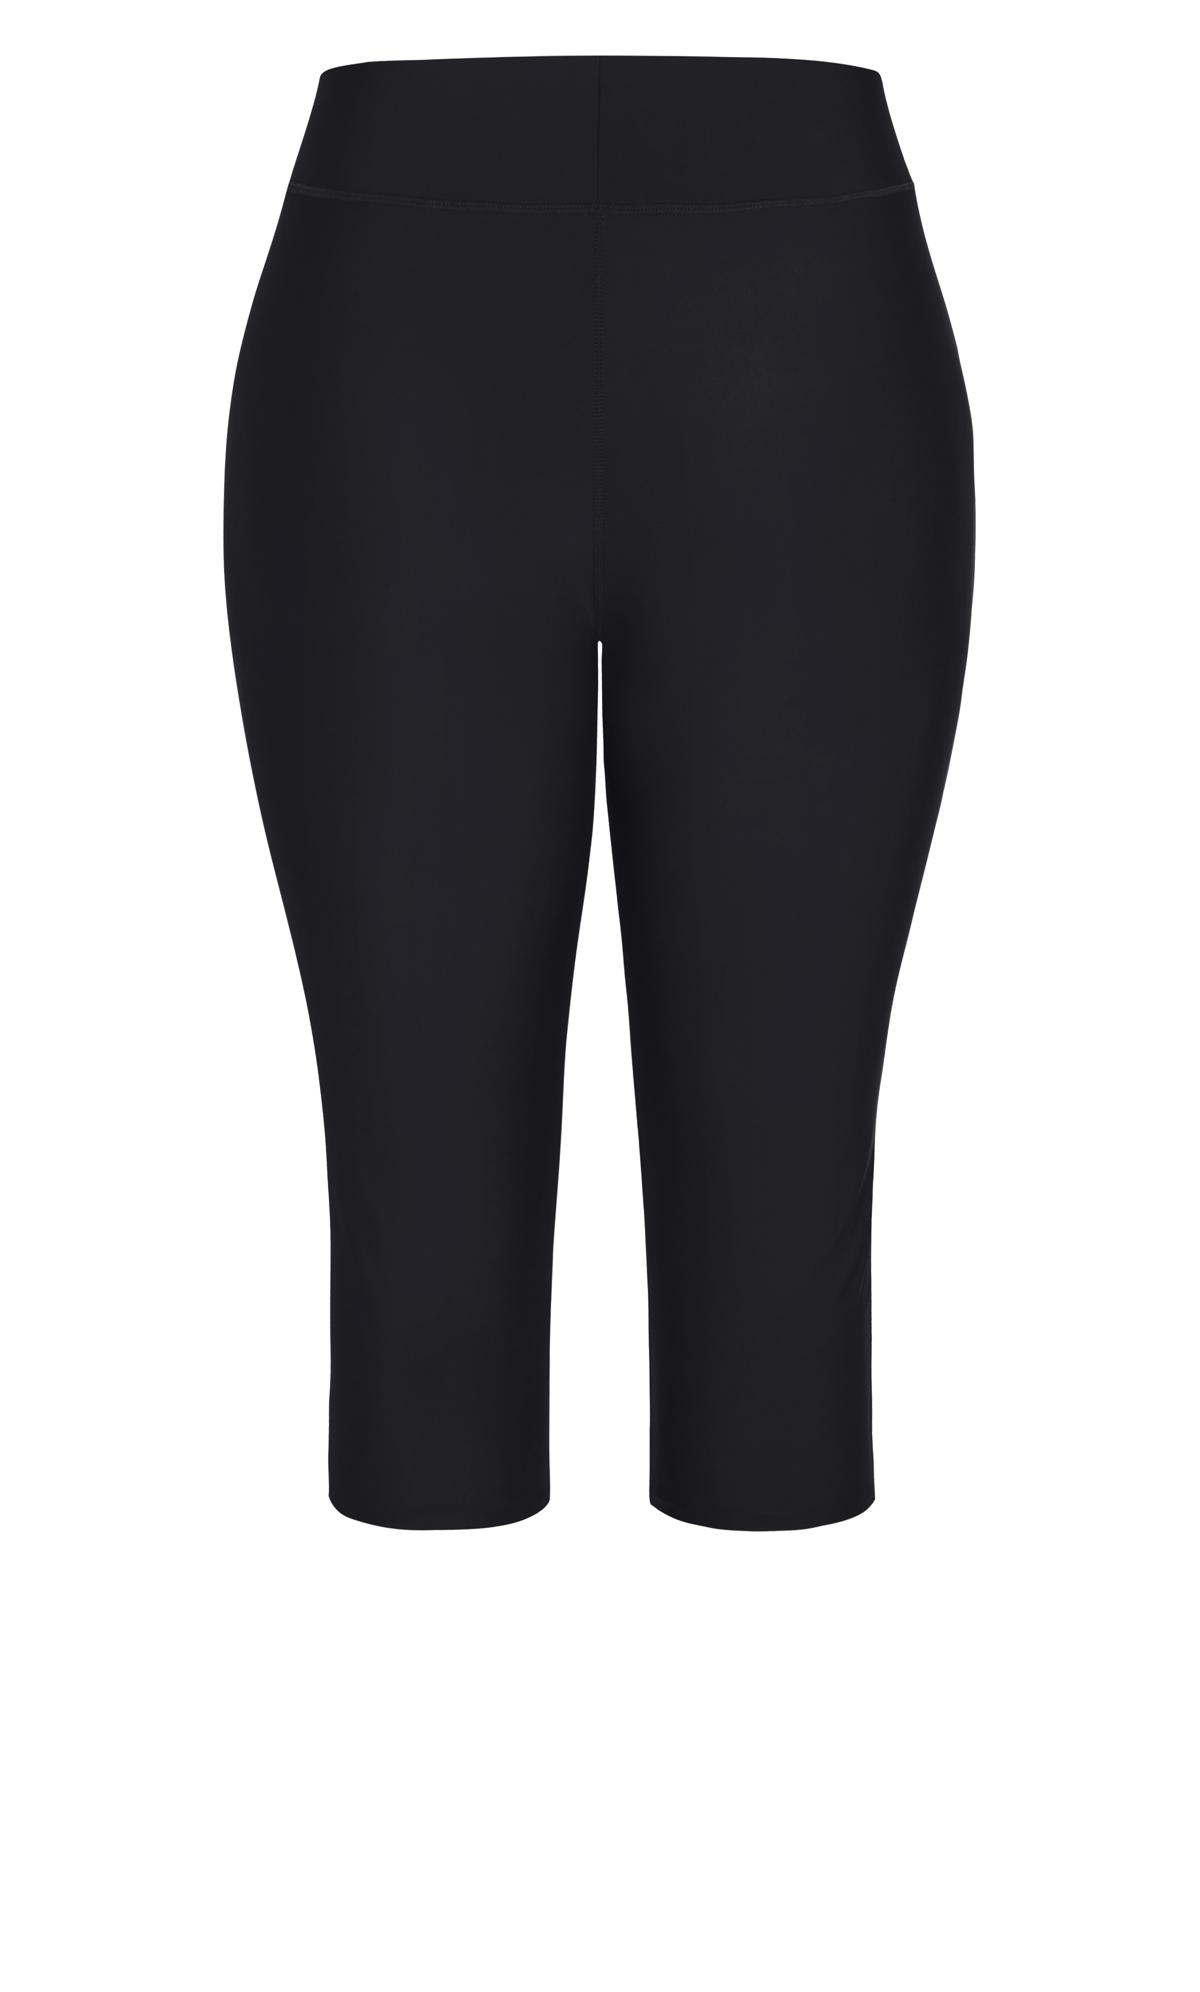 Hex Contour Black Shaping Form Fitted High Waisted Activewear Gym